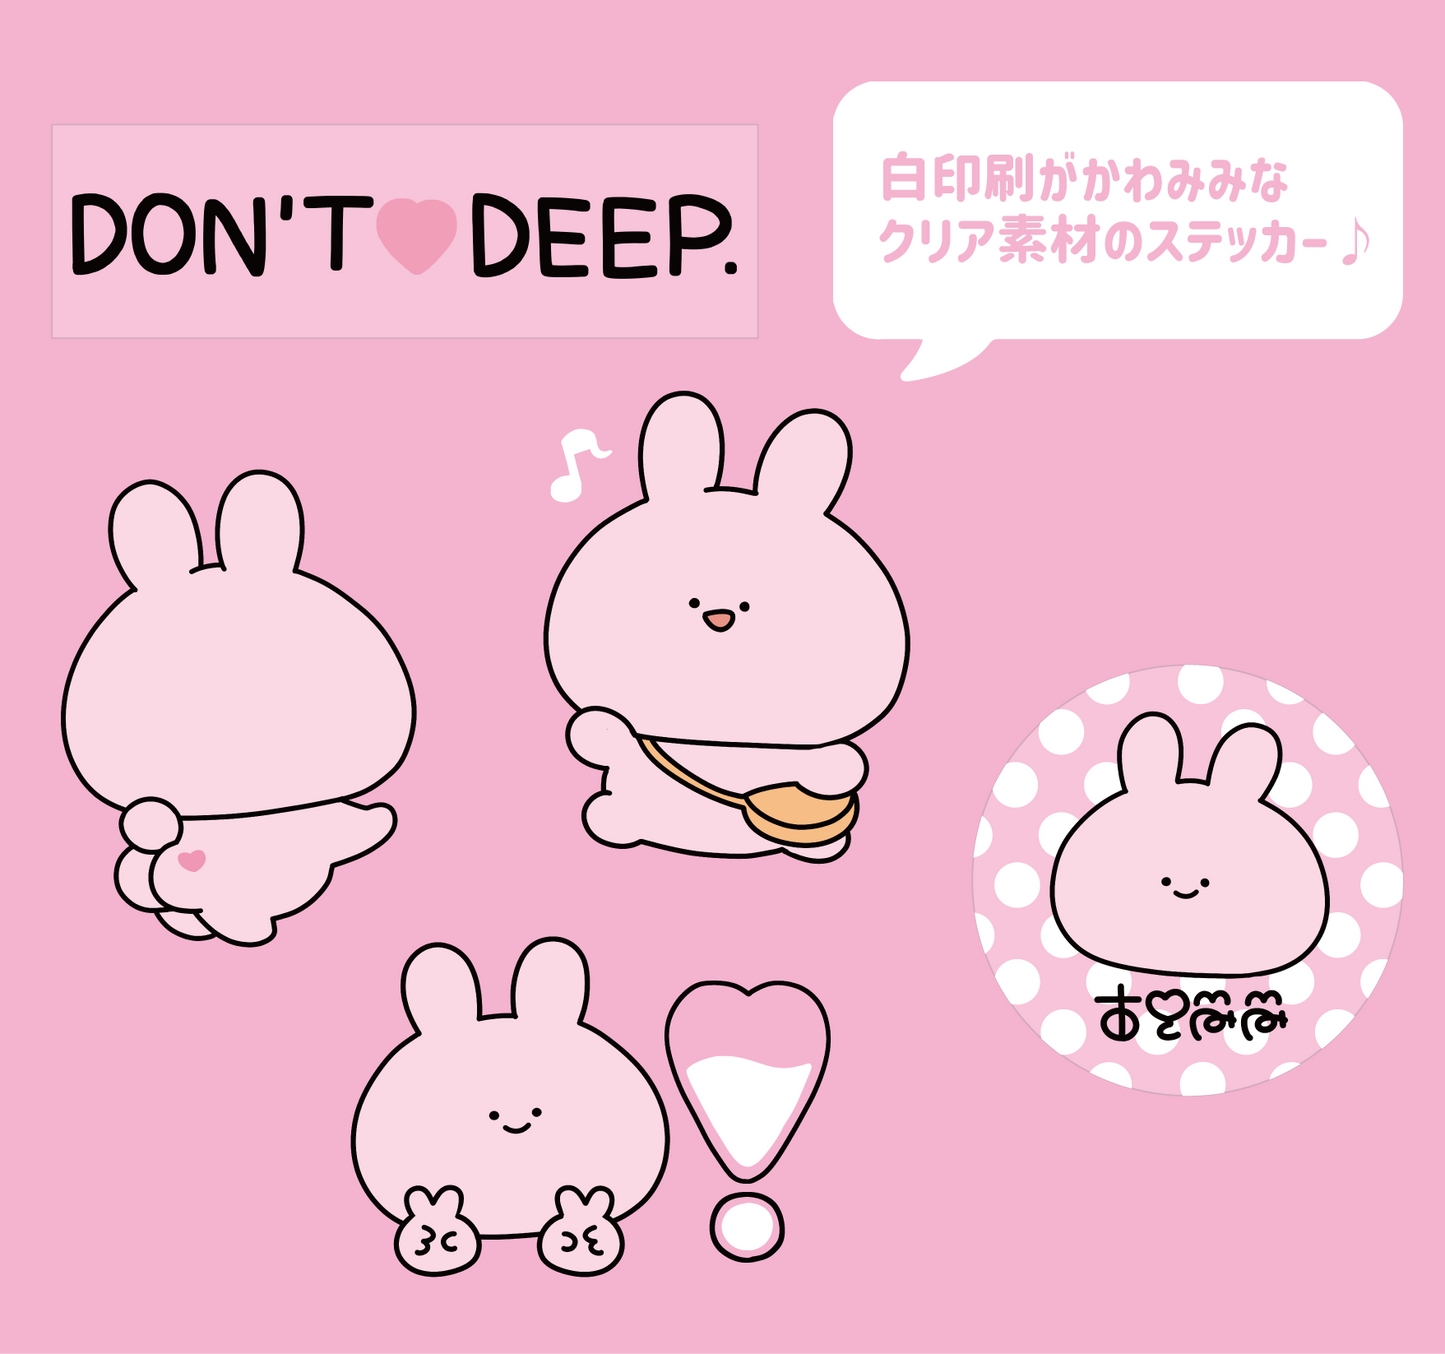 [Asamimi-chan] BASIC clear sticker (5 pieces)